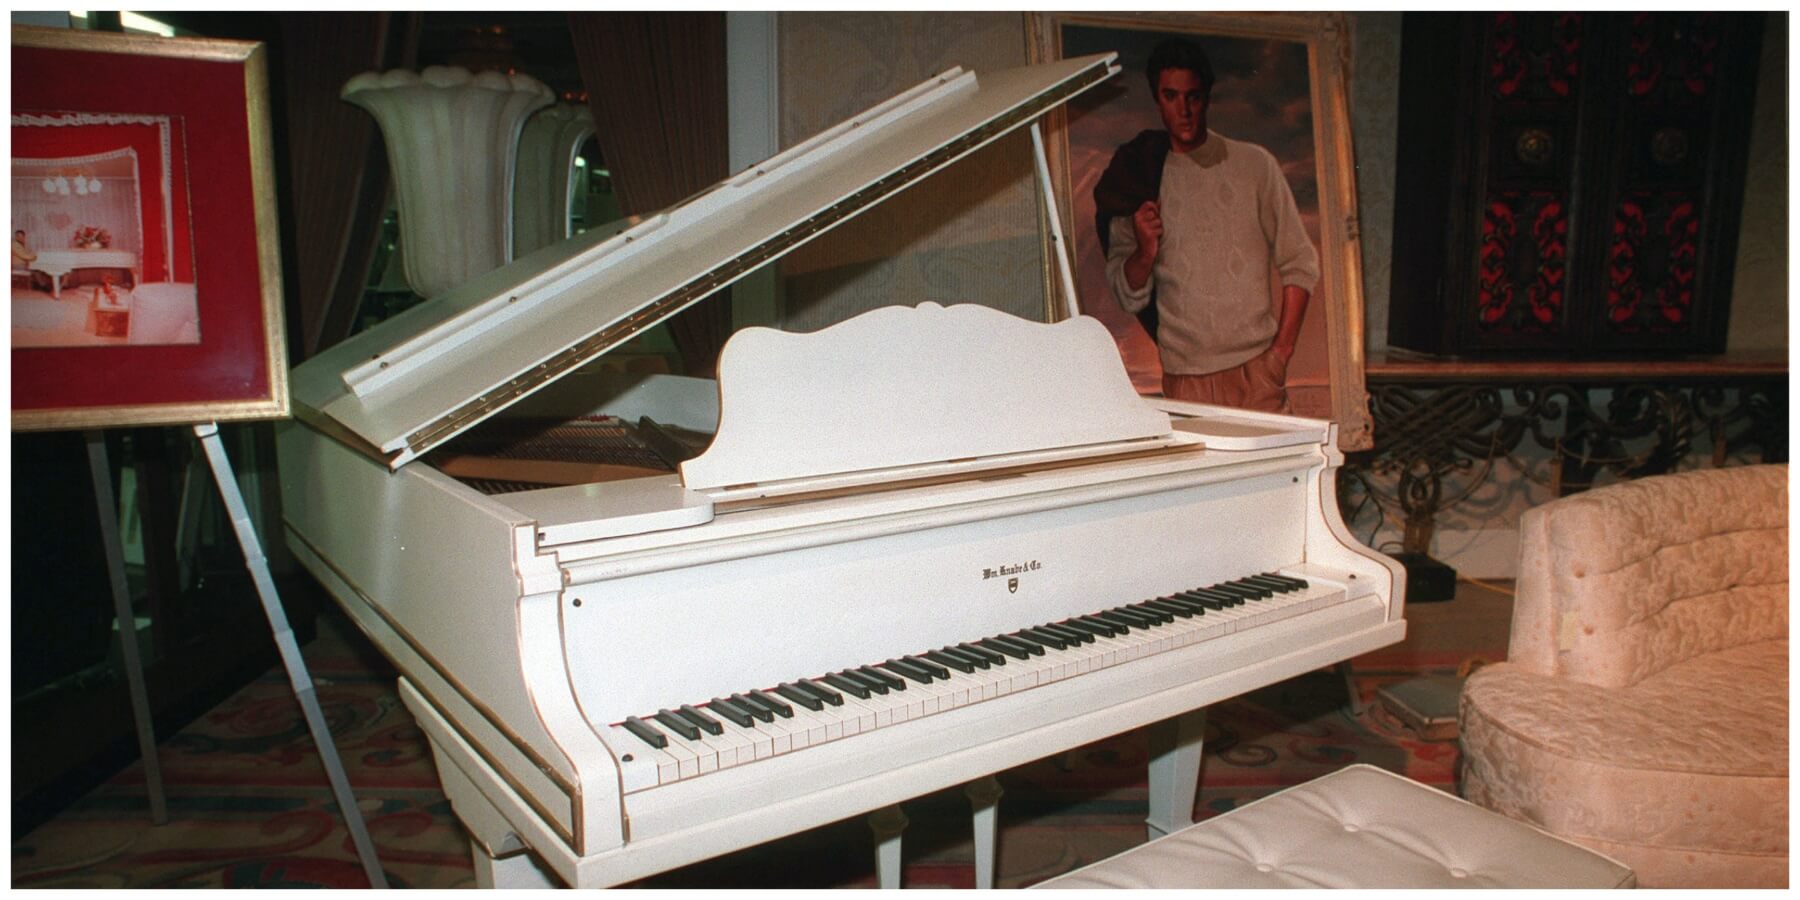 Elvis Presley's white piano holds a prominent place in Graceland's history.